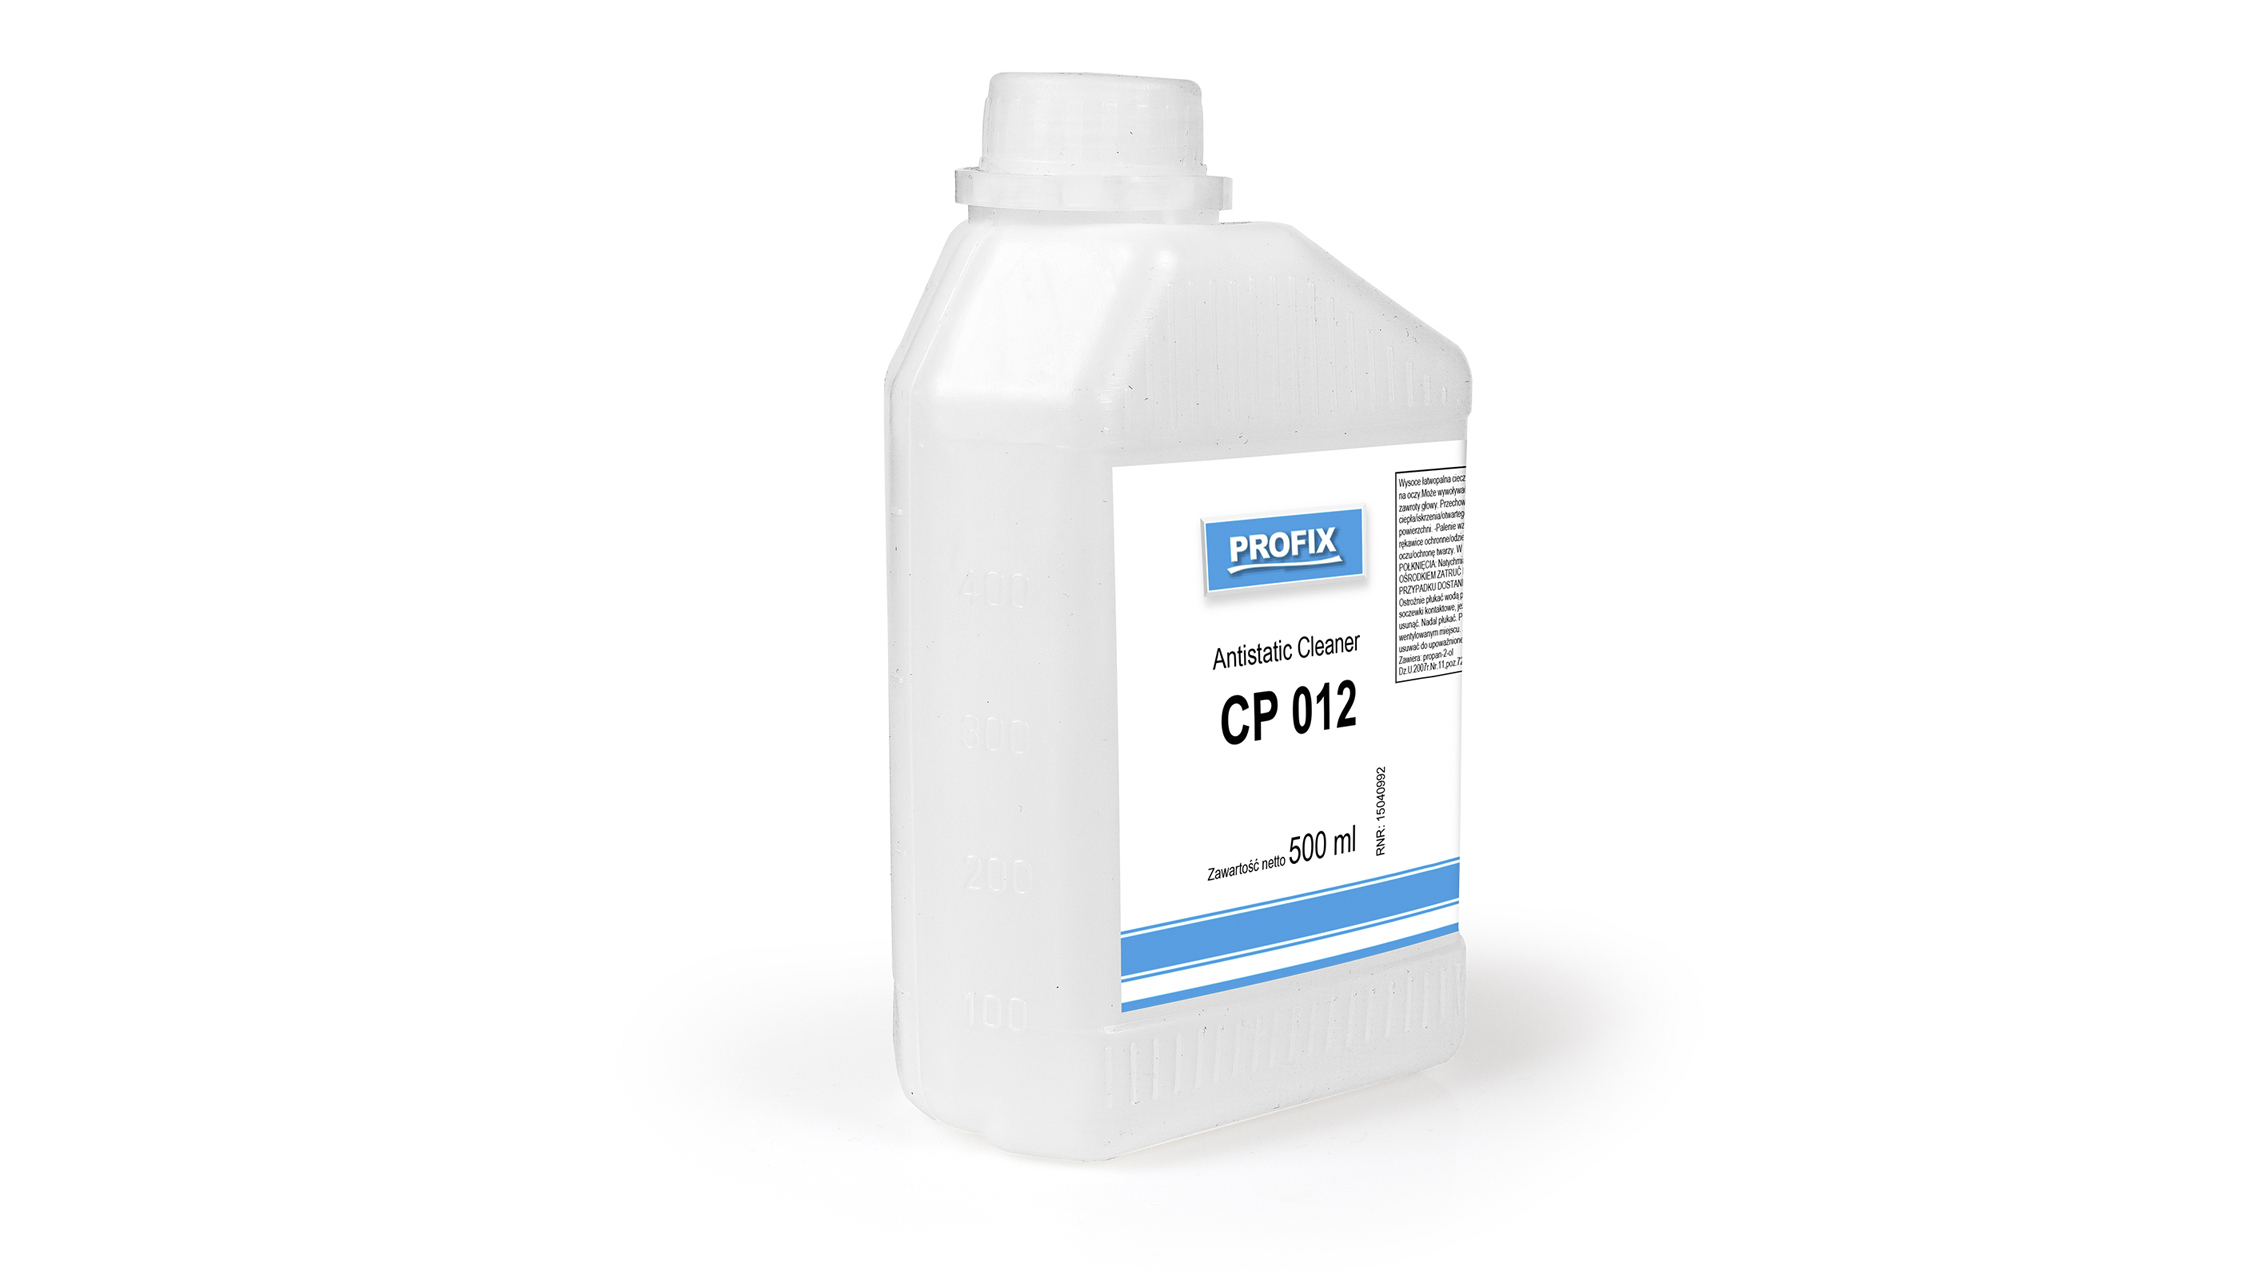 Zmywacz - Antistatic Cleaner CP 012 